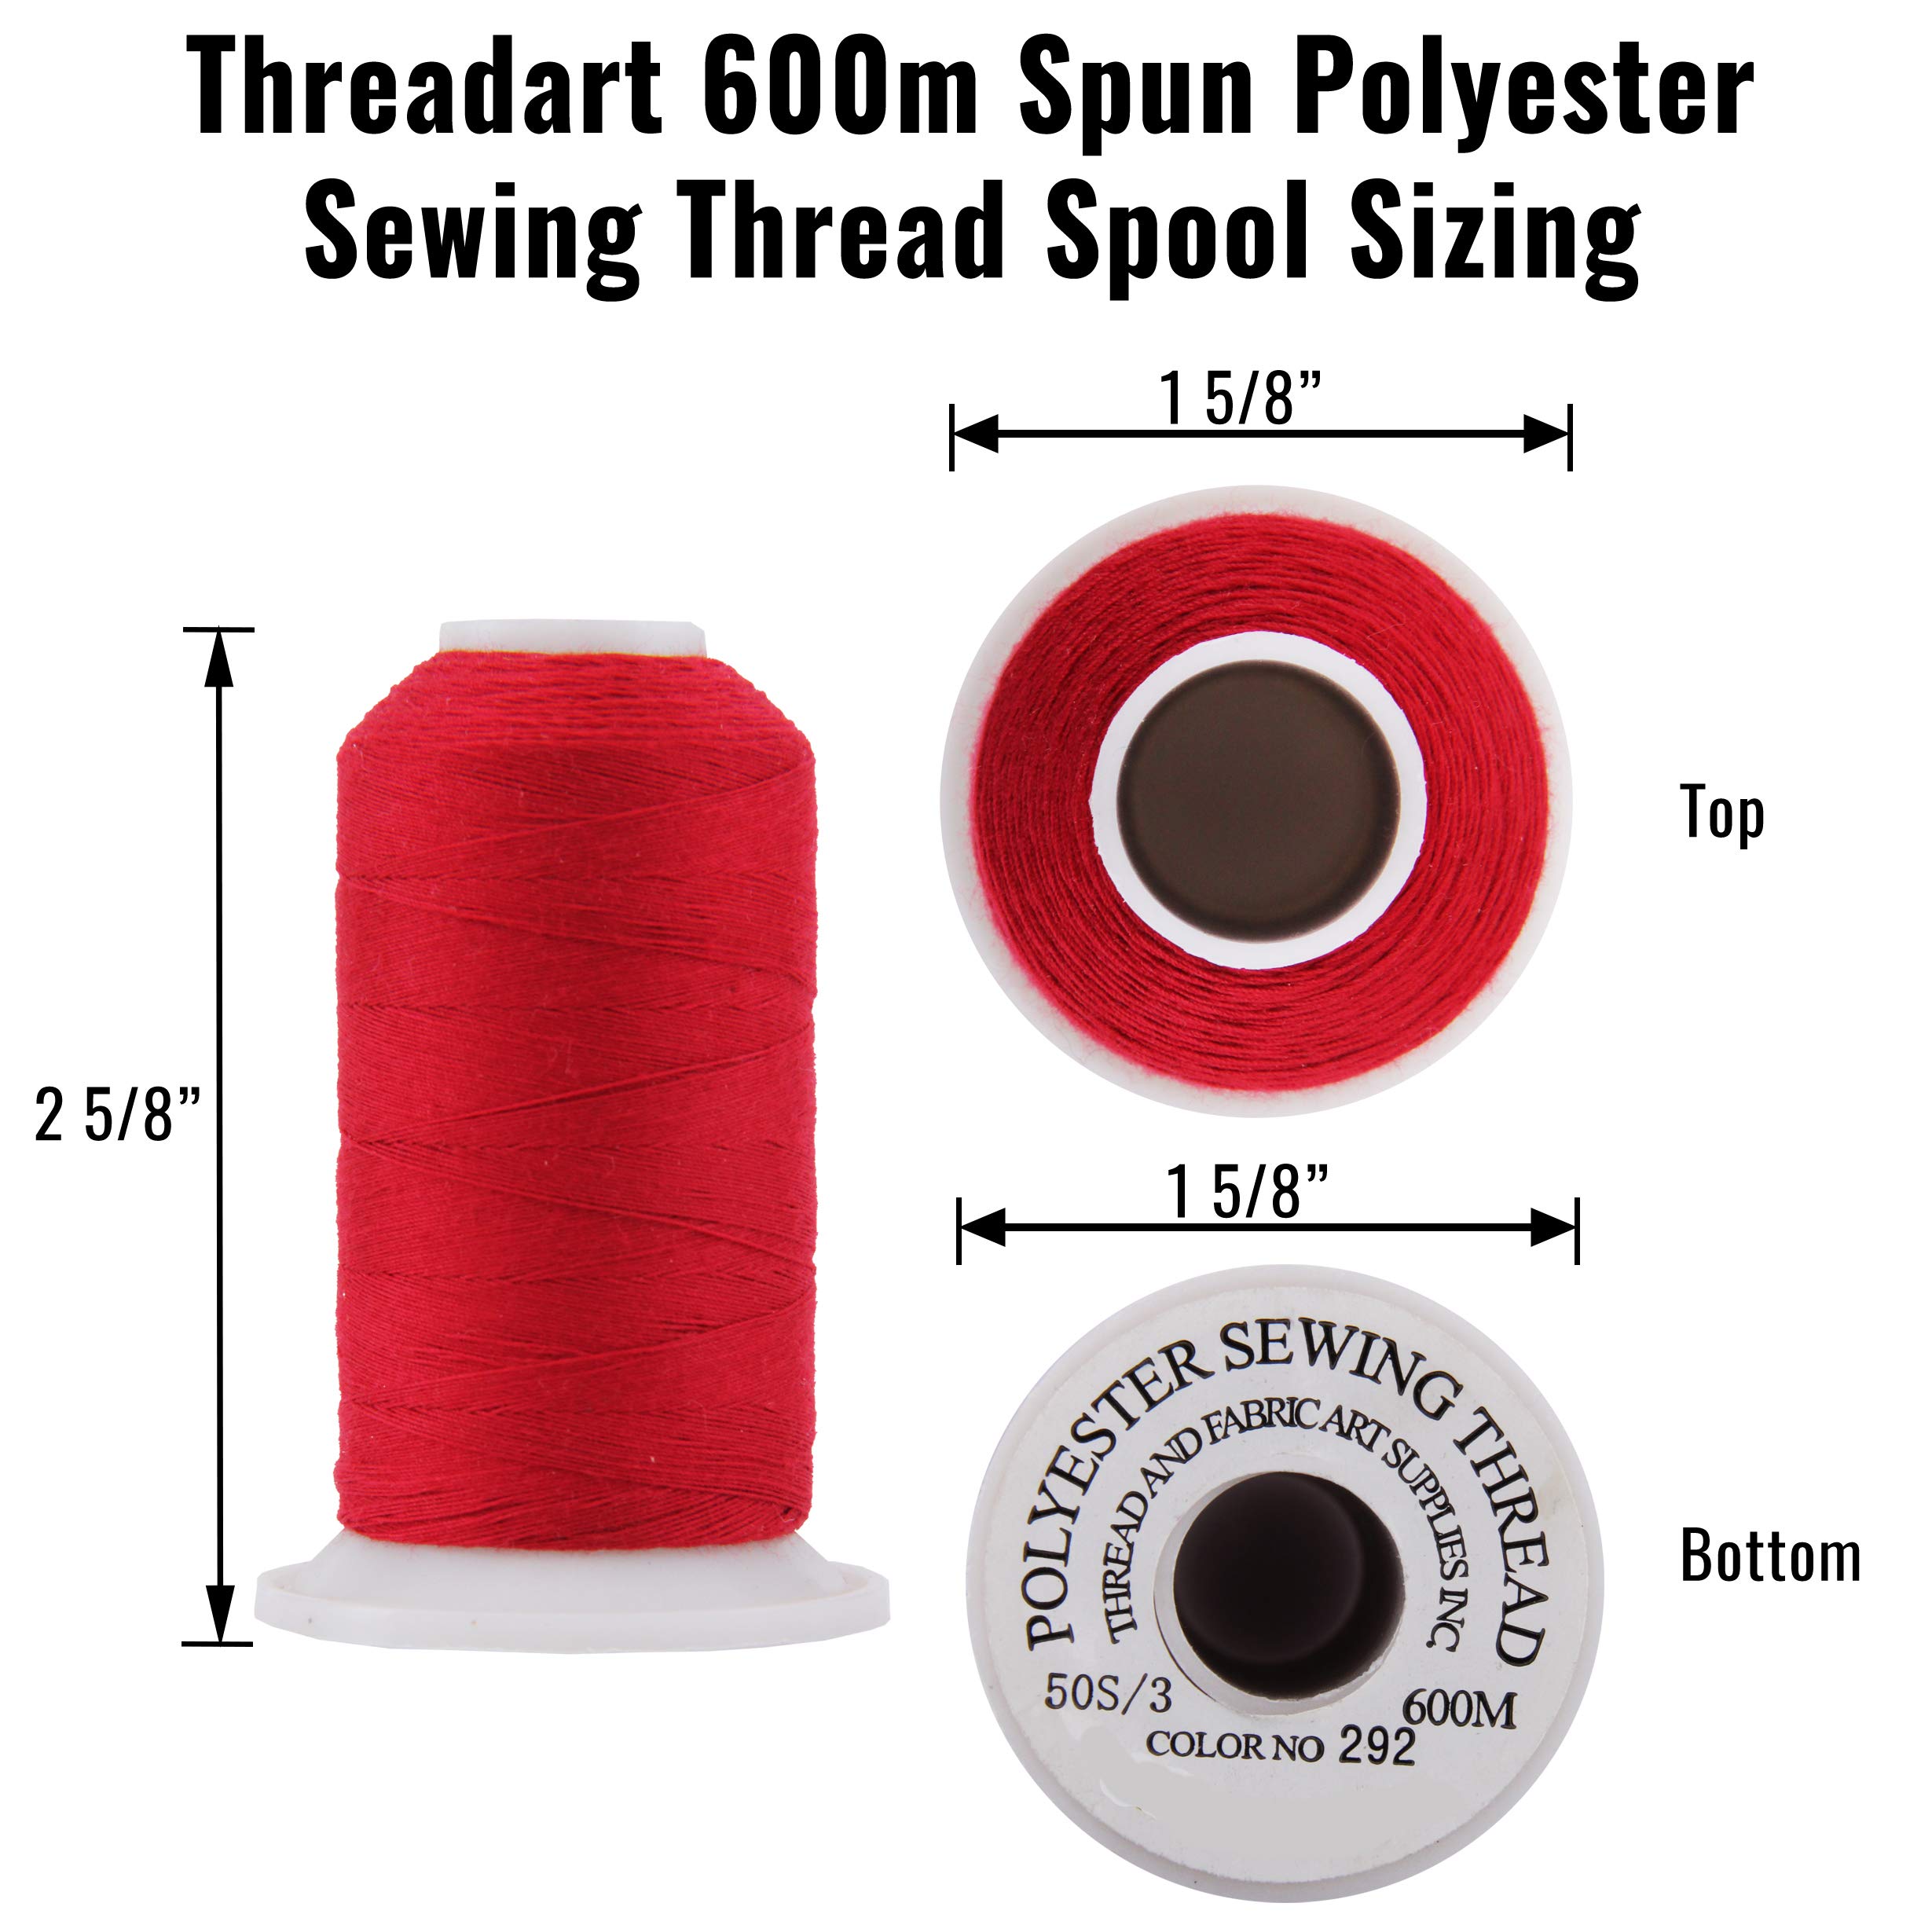 Threadart Polyester All-Purpose Sewing Thread - 600m - 50S/3 - Pewter